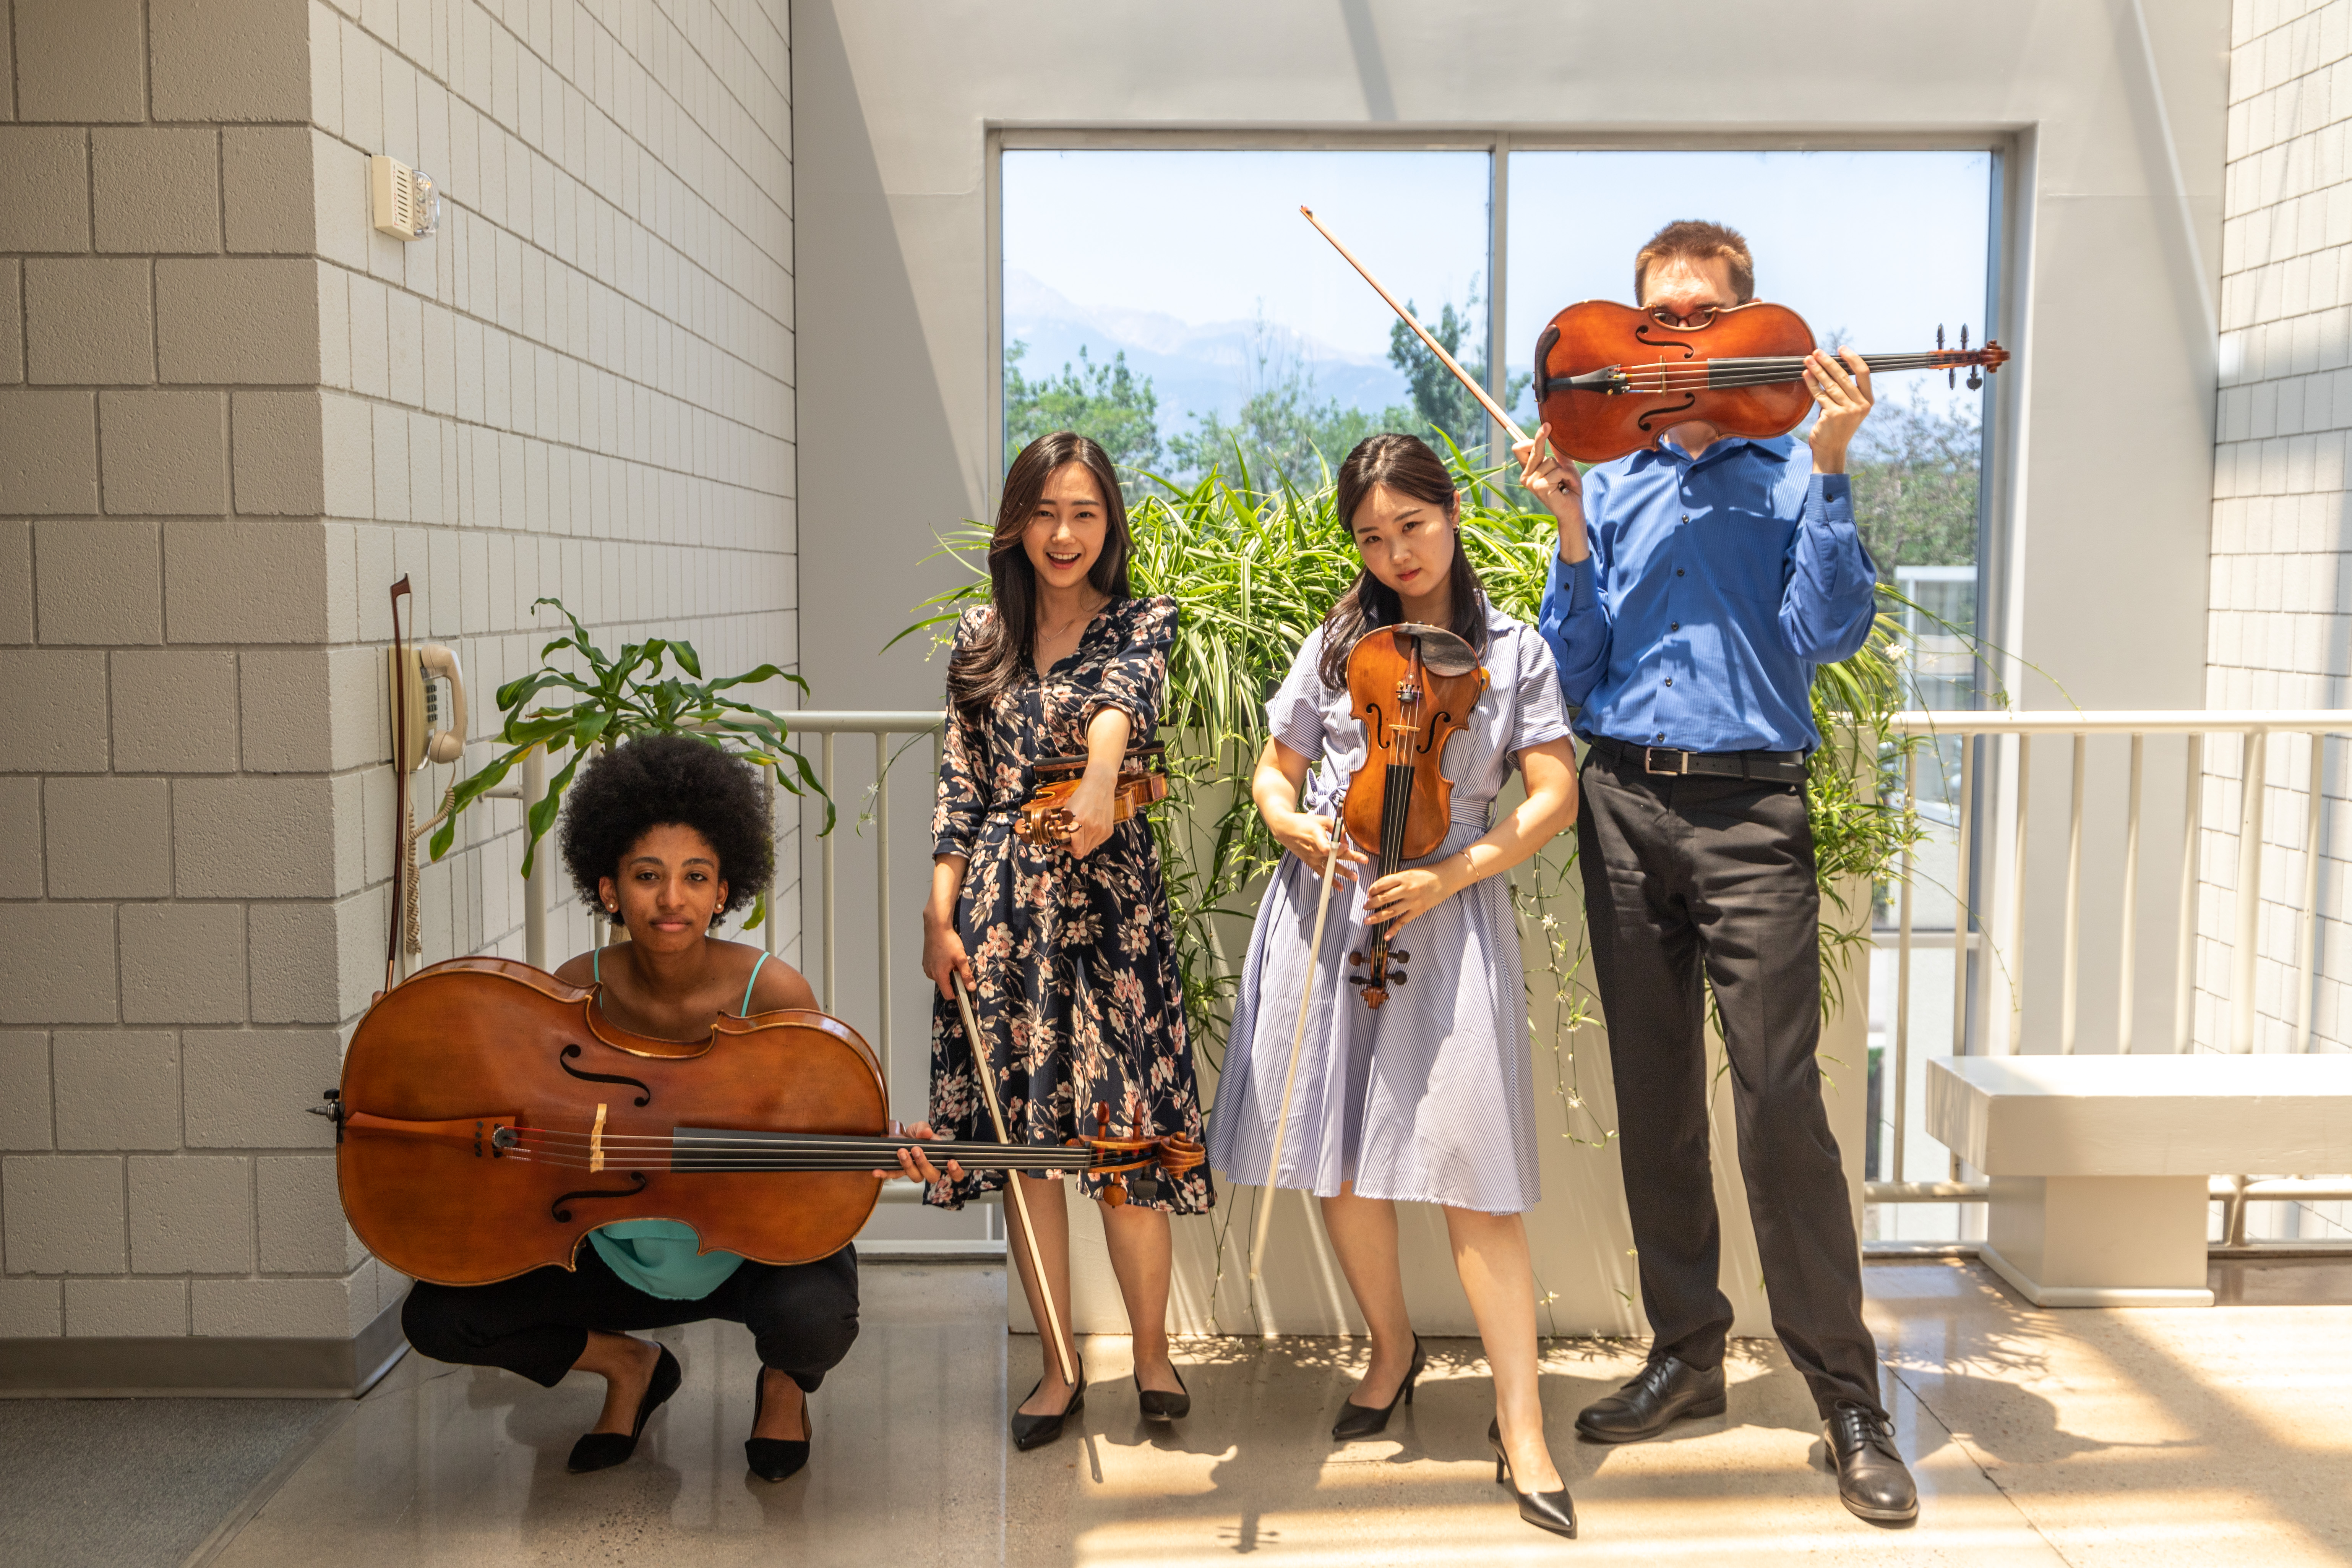 '22 Fellows Angelique Montes, Esder Lee, Sungkyung Yoo, & Daniel Moore <span class="cc-gallery-credit">[Sienna Busby]</span>